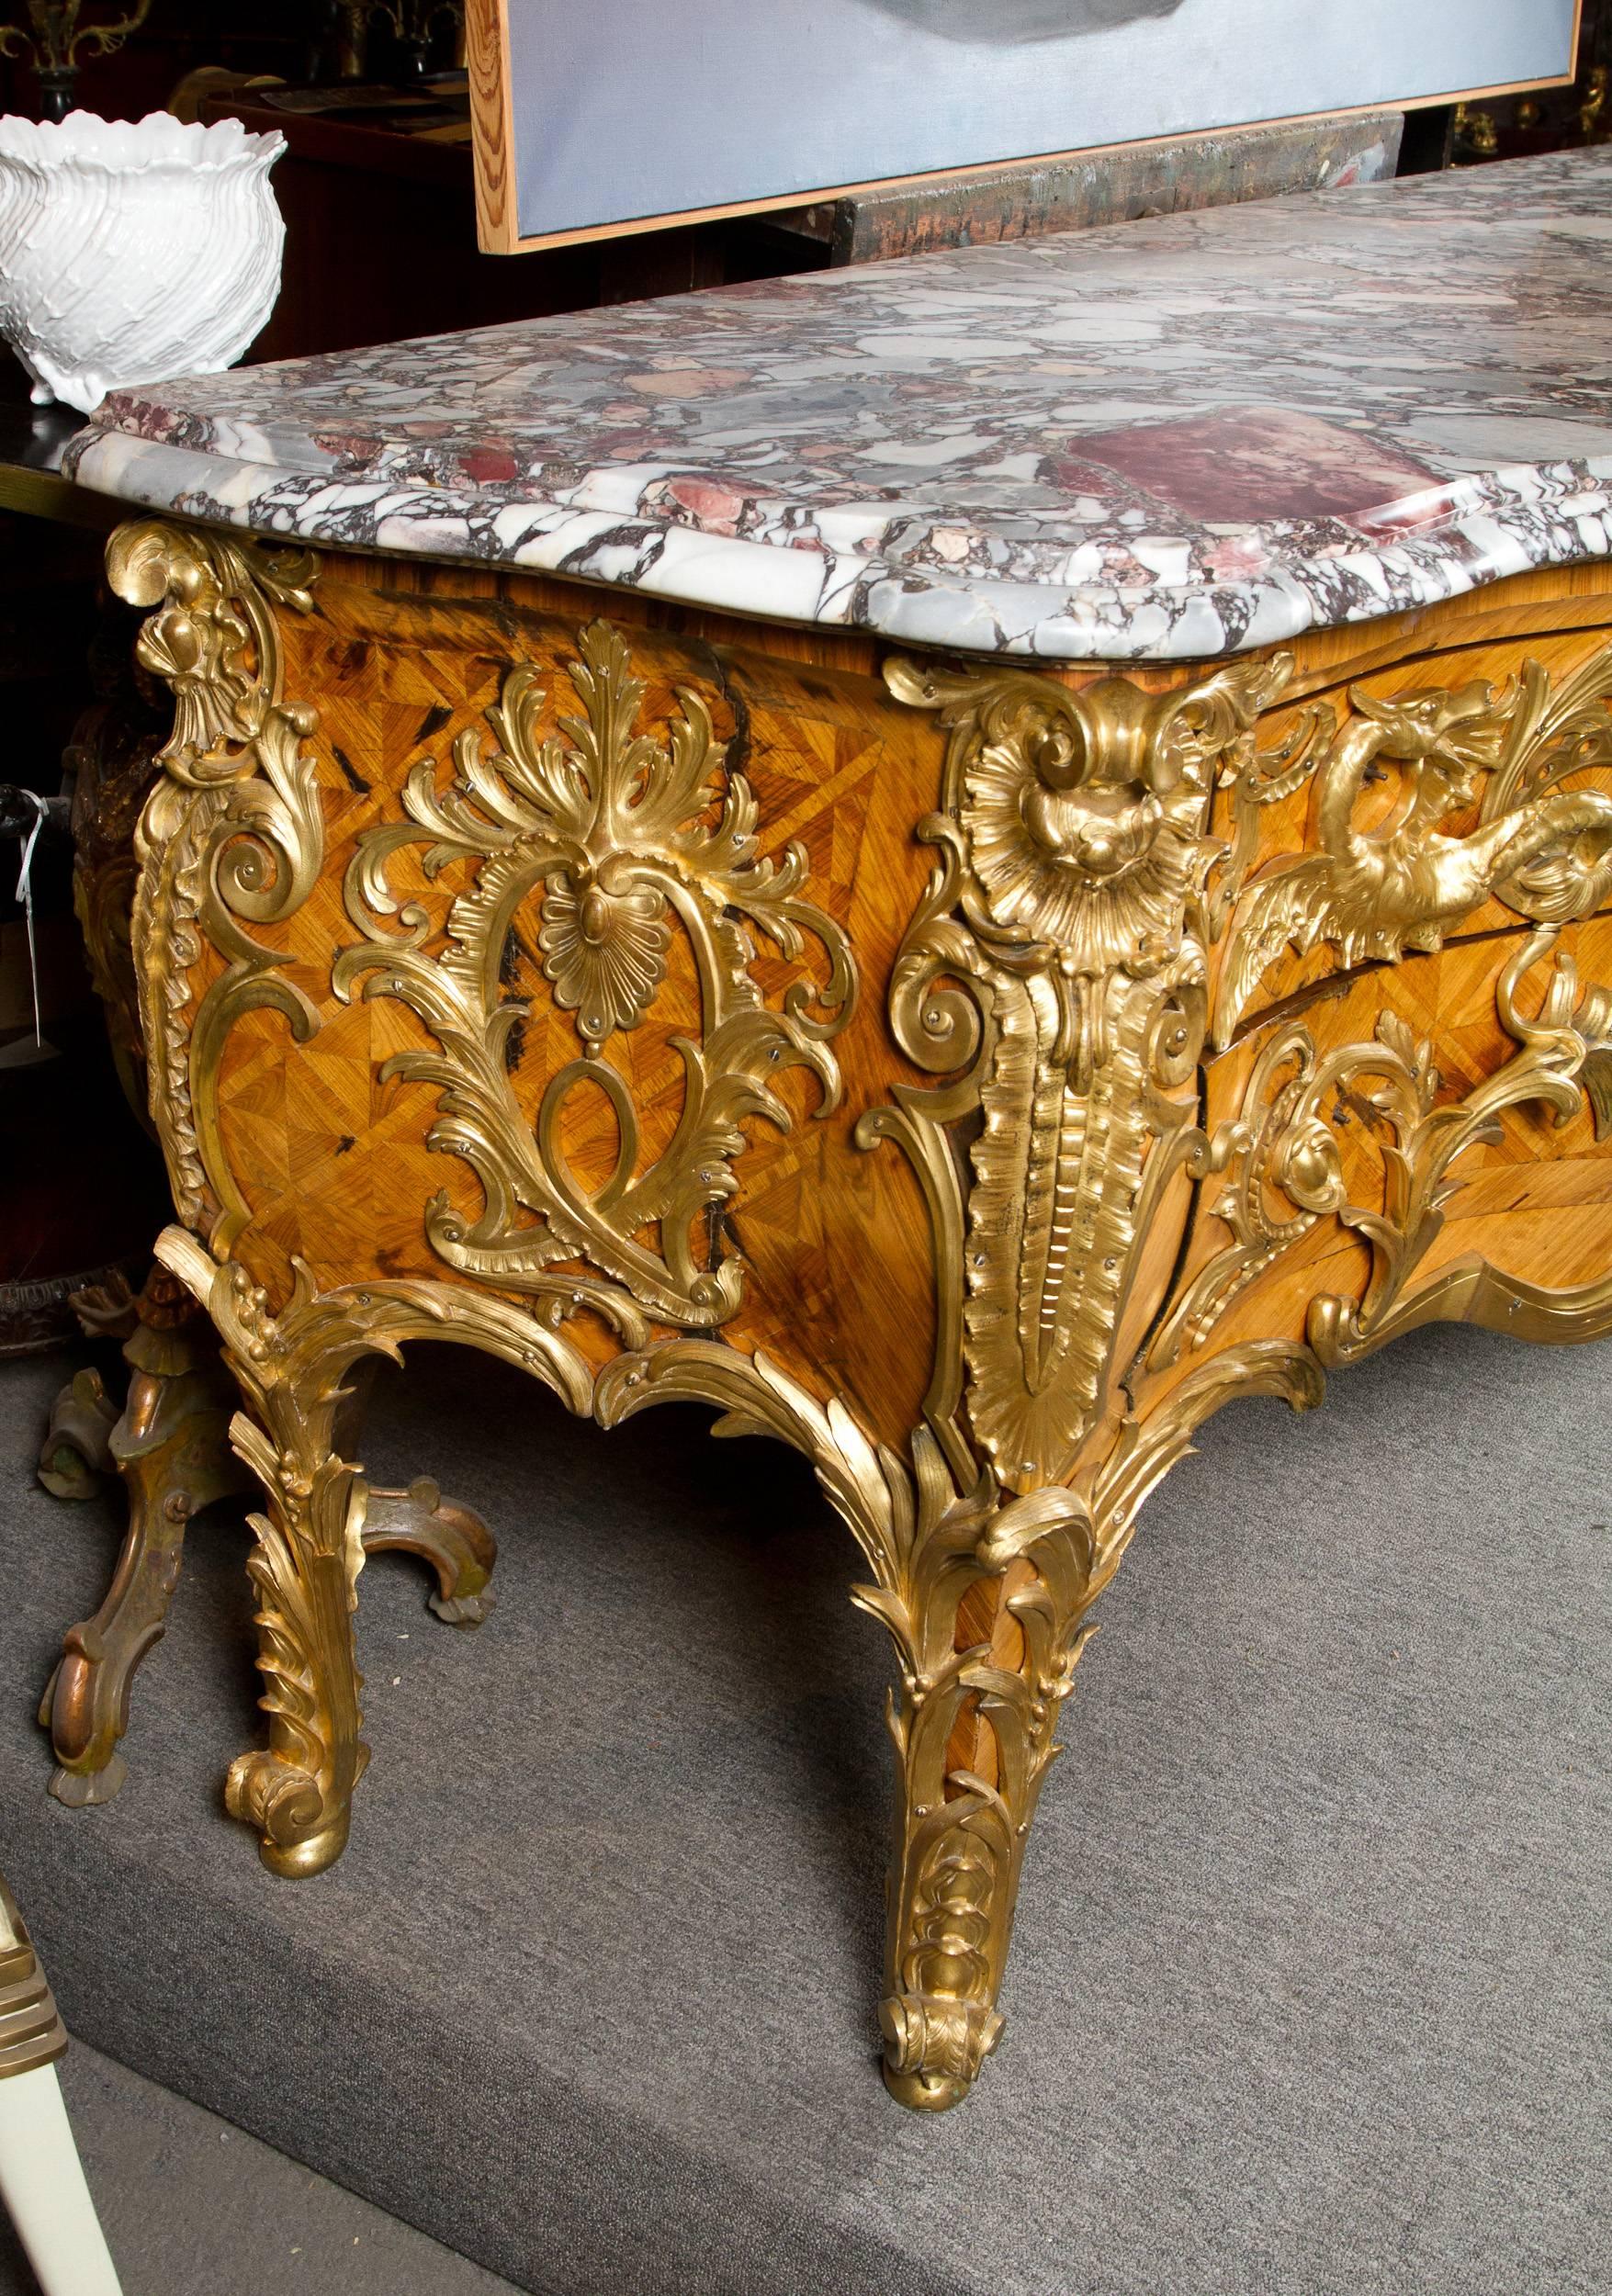 Rare and important Louis XV style commode after an 18th century model designed by Antoine Robert Gaudreau ebeniste of king Louis XV. The original commode was made for the King's private chambers in the palace of Versaille in 1739 and is now on